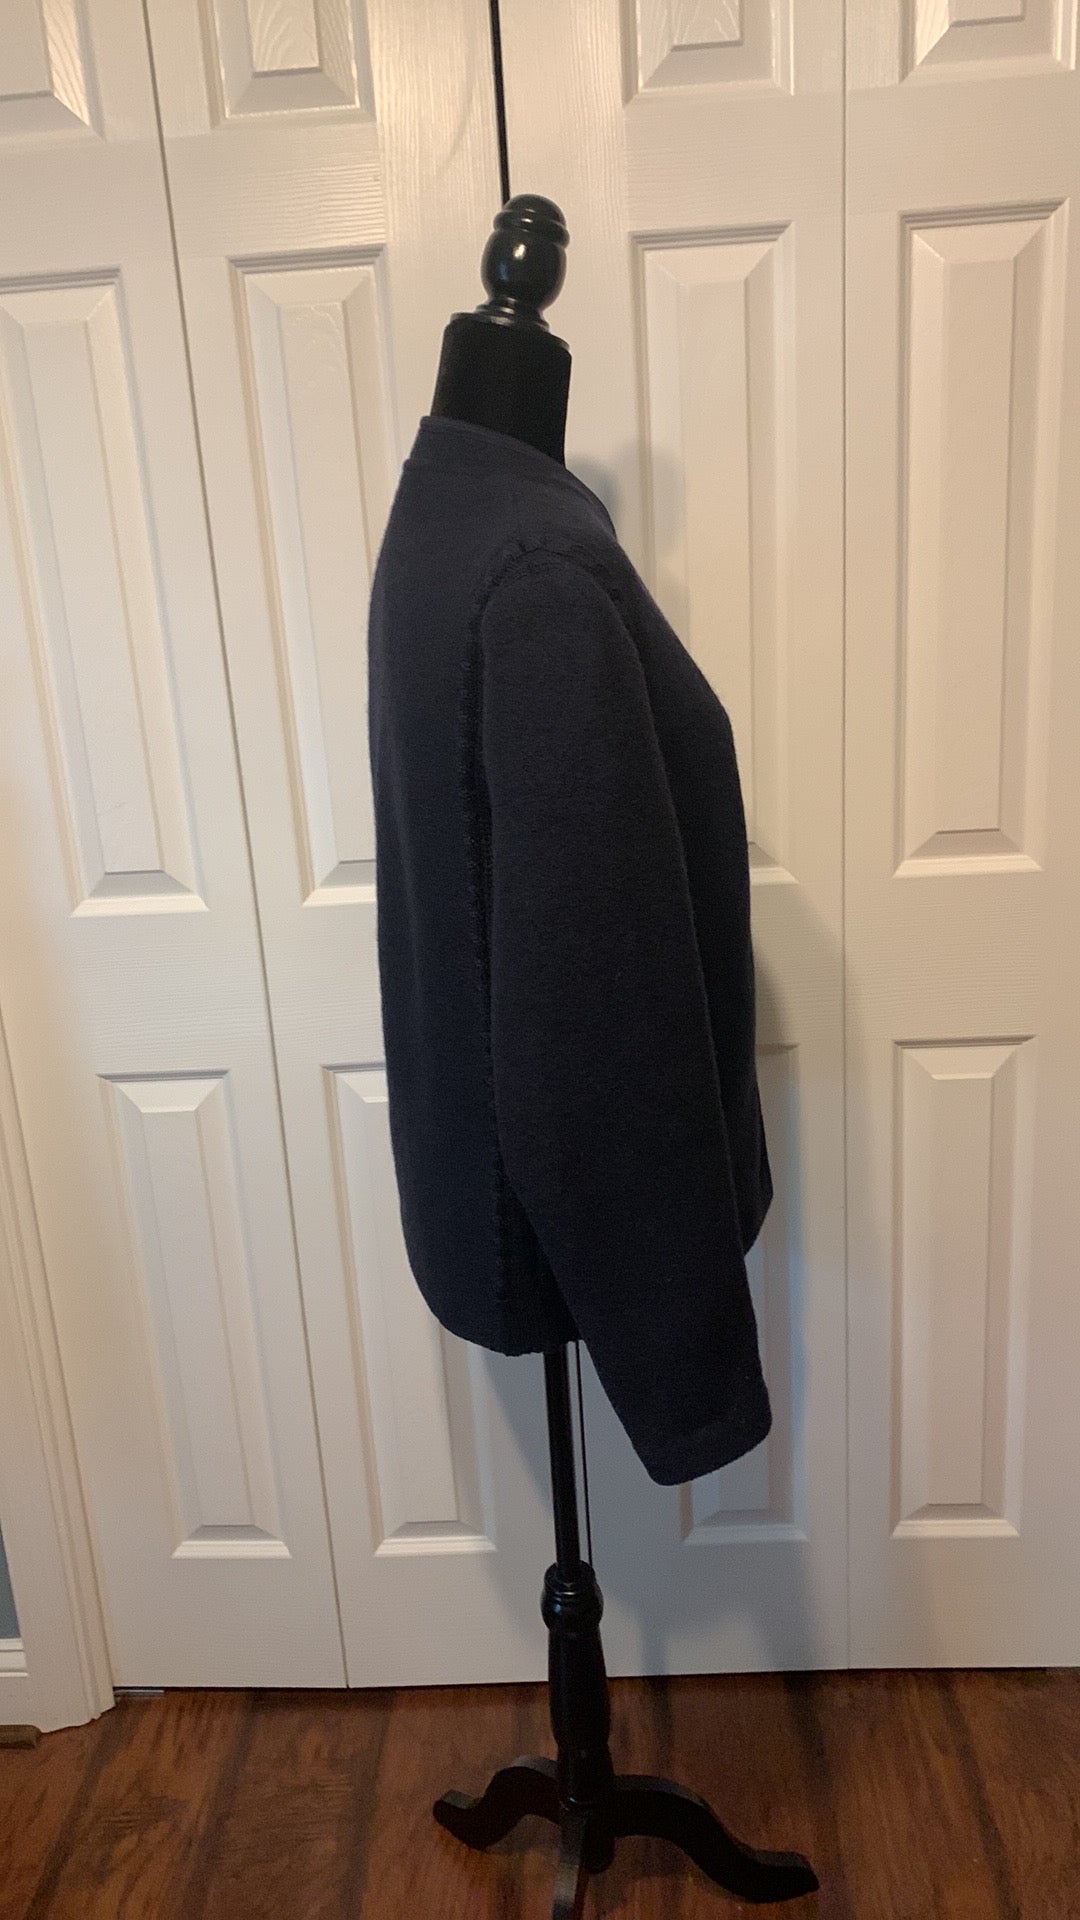 Vintage Reine Schurwolle Pure Wool Navy Blue like new cable knit sides Jacket